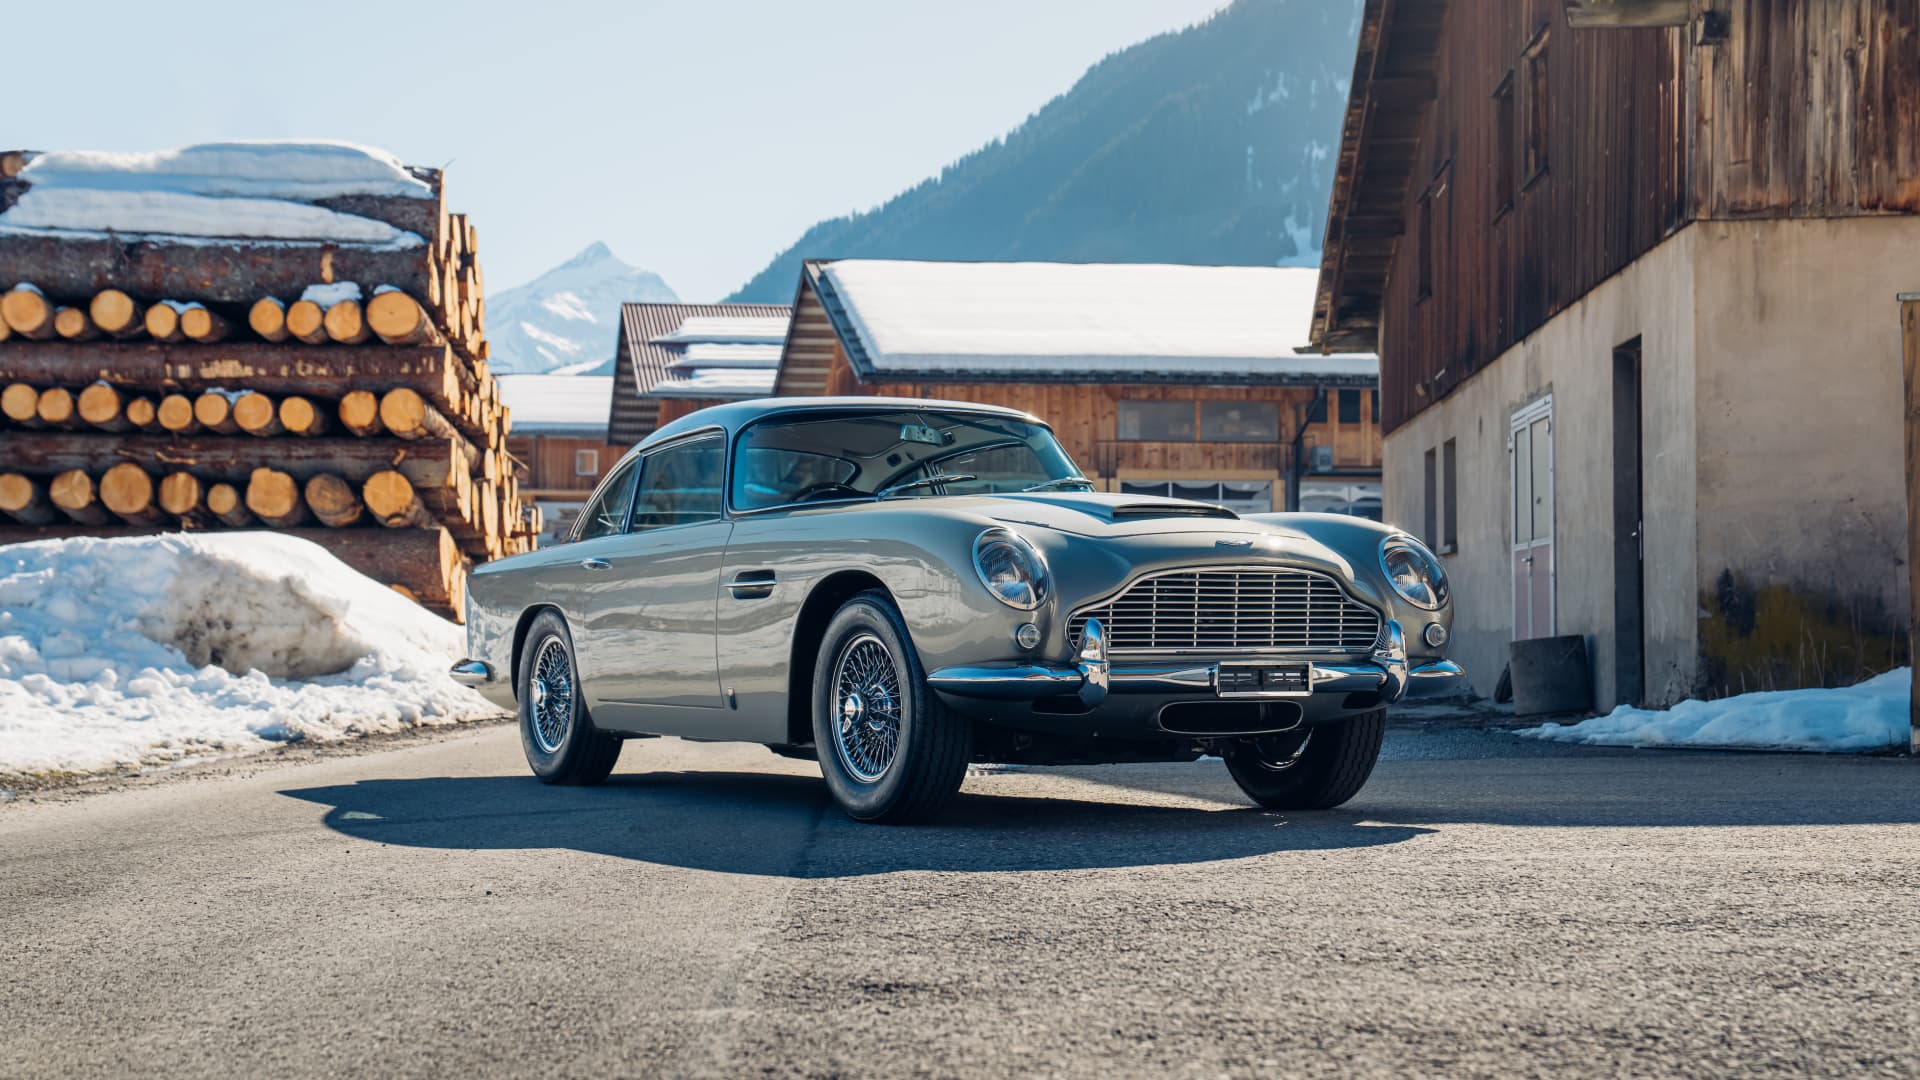 Sean Connery’s ‘James Bond’ Aston Martin DB5 is up for auction—and it could sell..